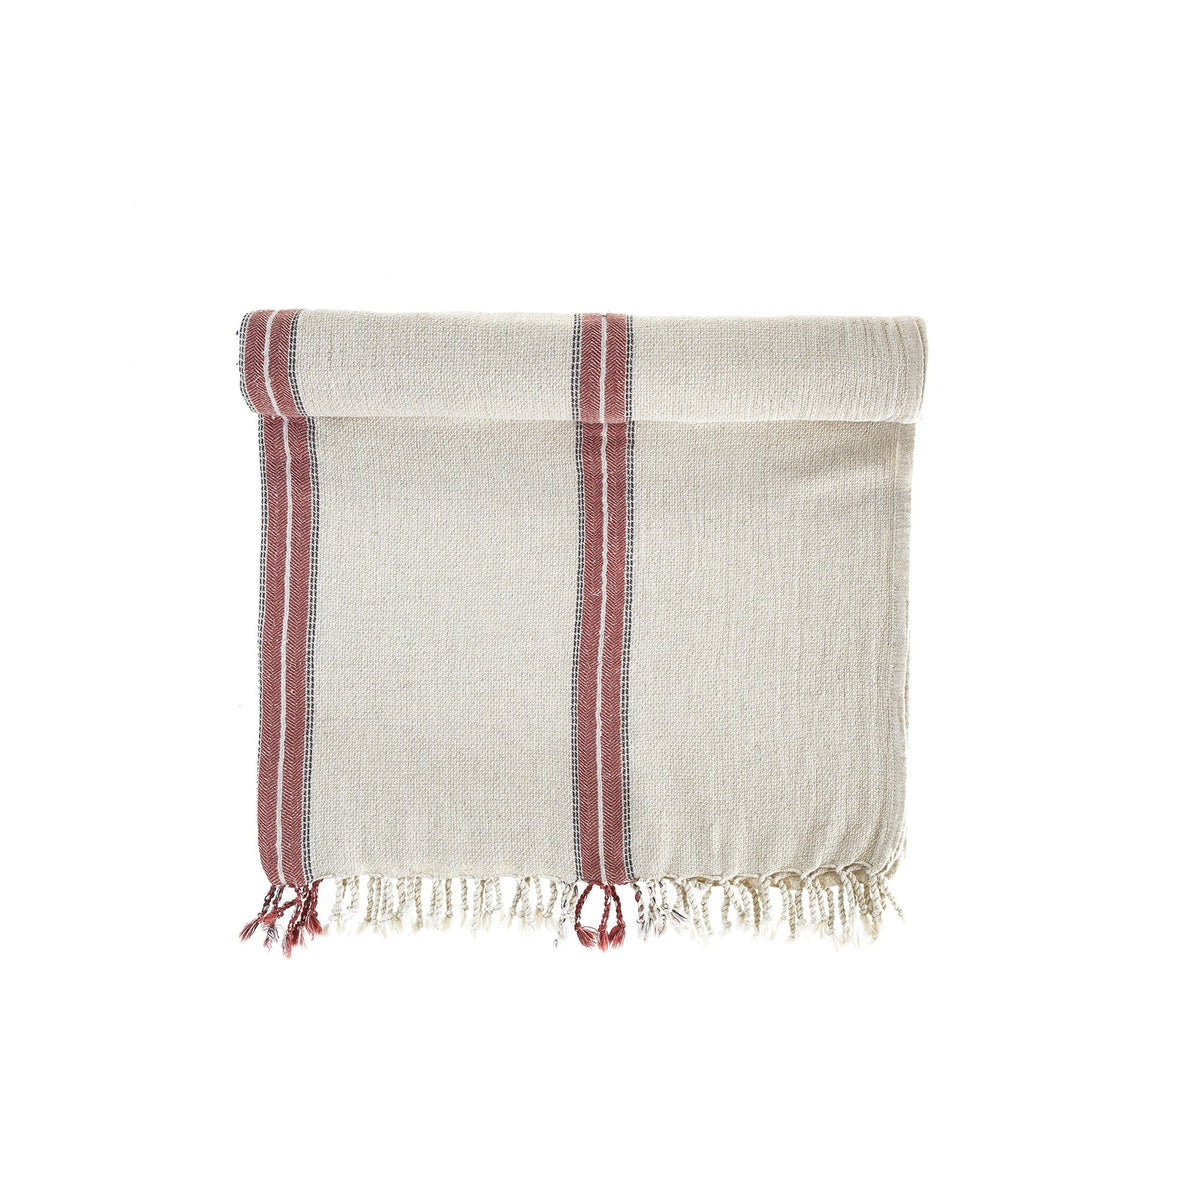 Eversoft Turkish Towel - Olive and Linen